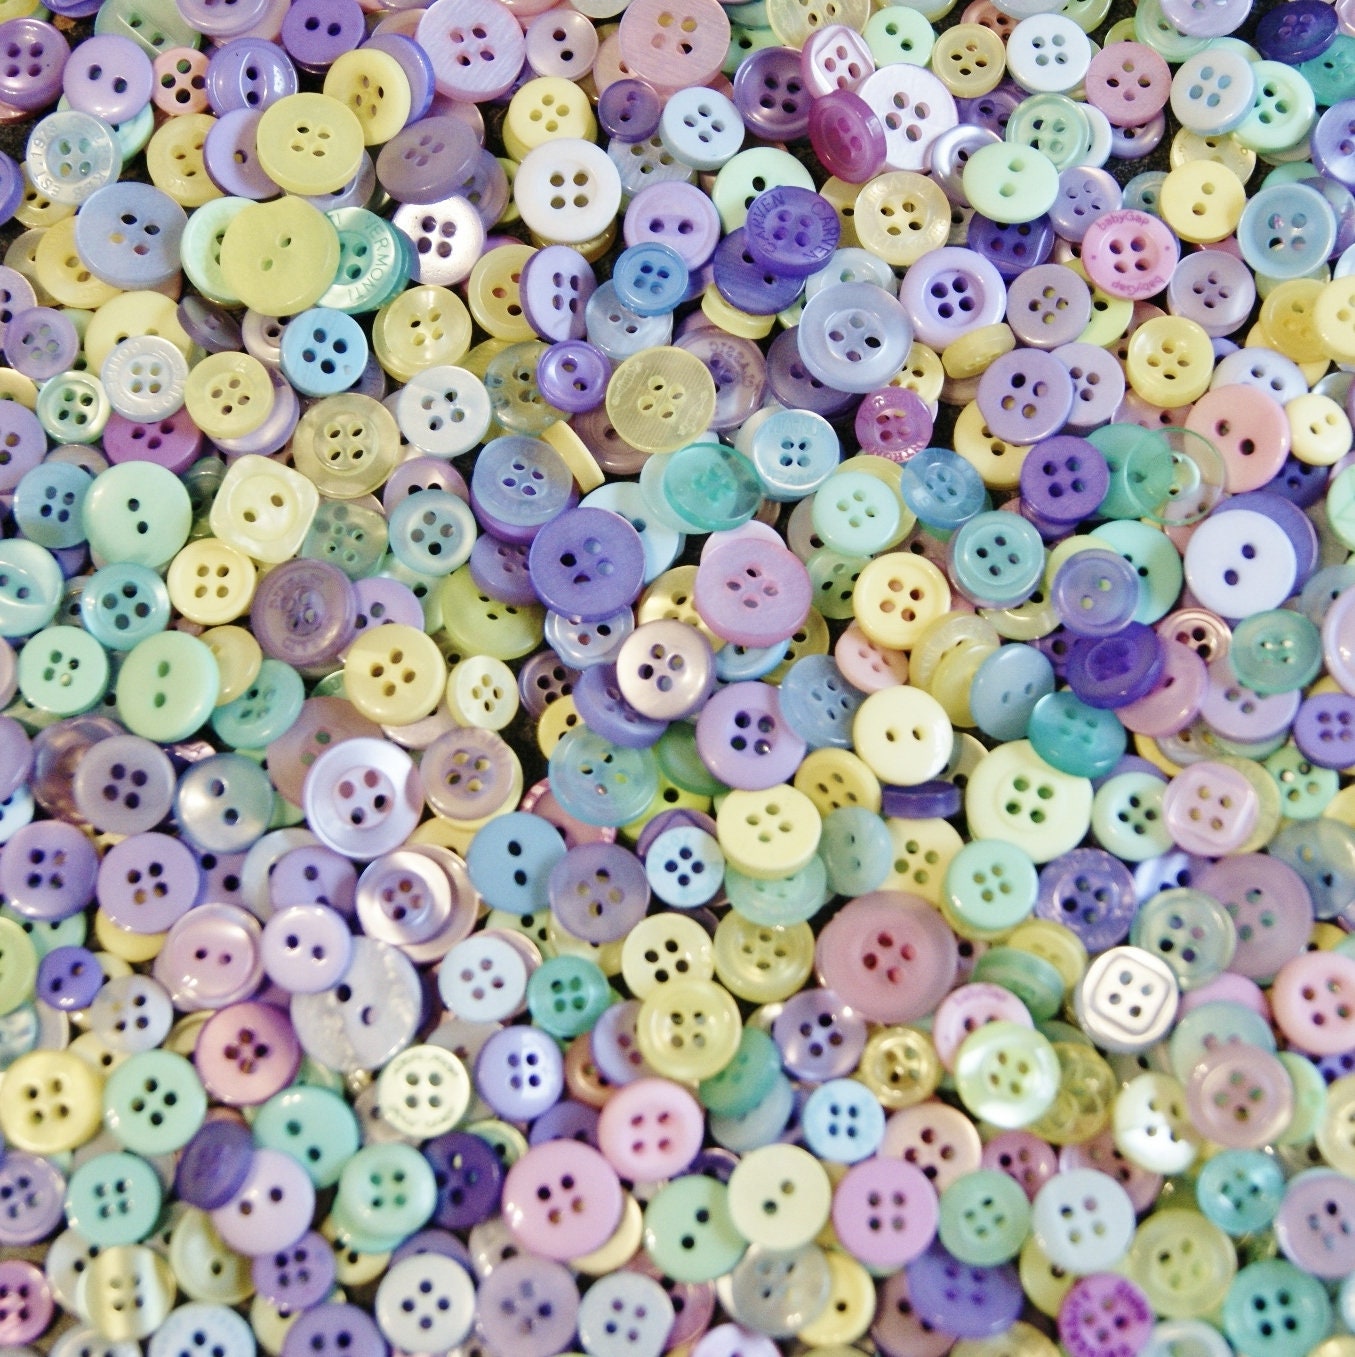 500 Pink Button Small Button Mix, Pink, Sewing Buttons, Craft